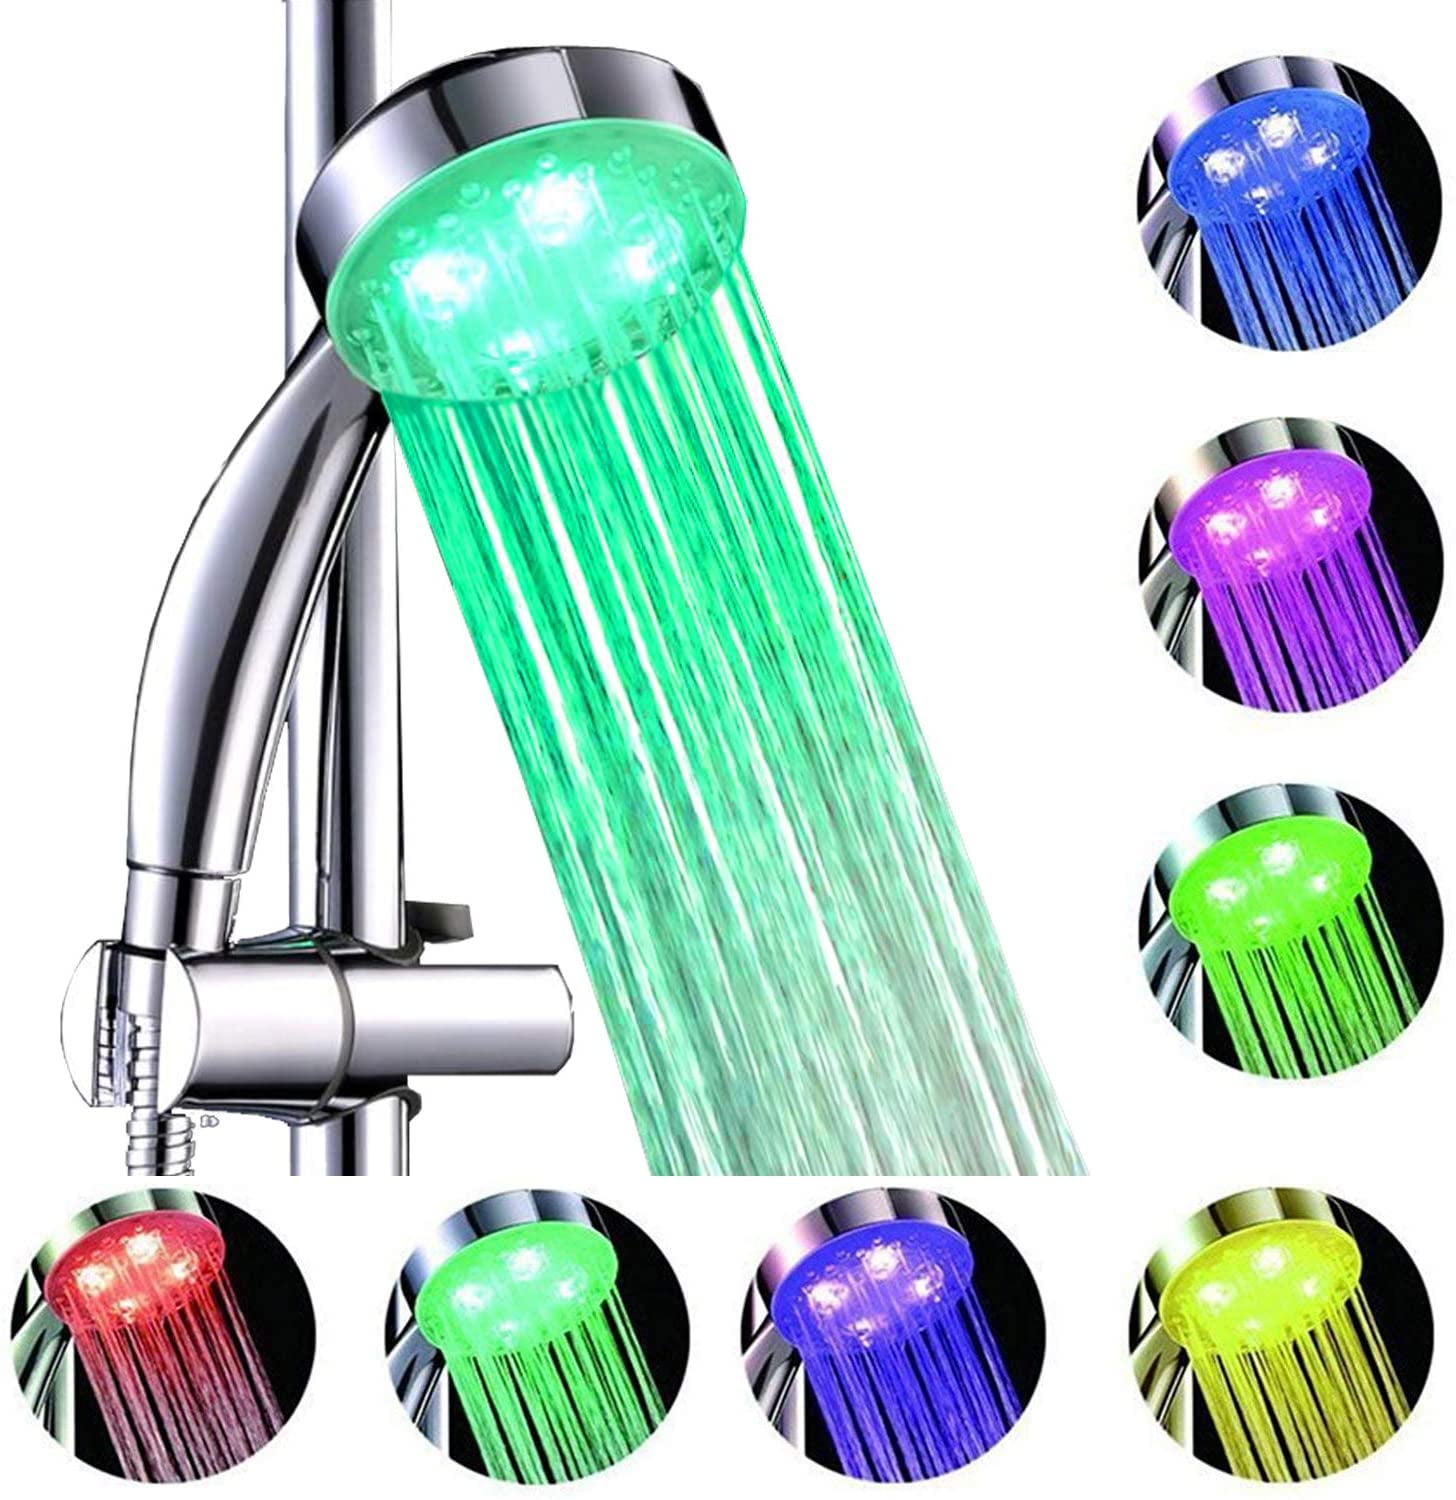 NEW Colorful Head Home Bathroom LED Shower Water Glow Light 